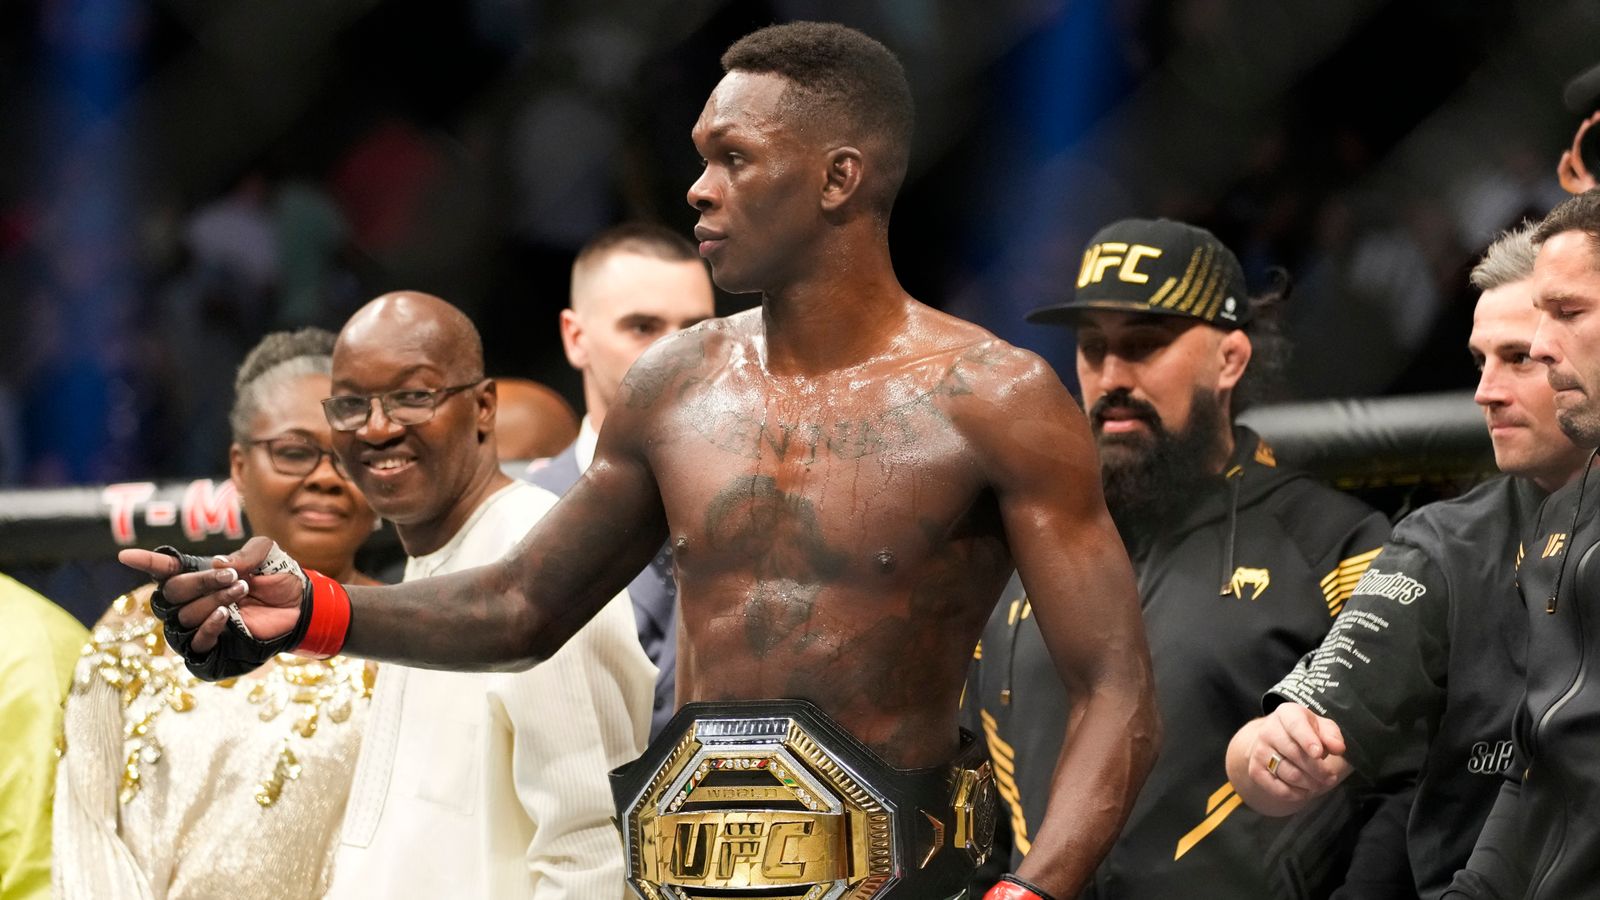 ufc-276-israel-adesanya-defeats-jared-cannonier-to-retain-middleweight-title-targets-alex-pereira-next